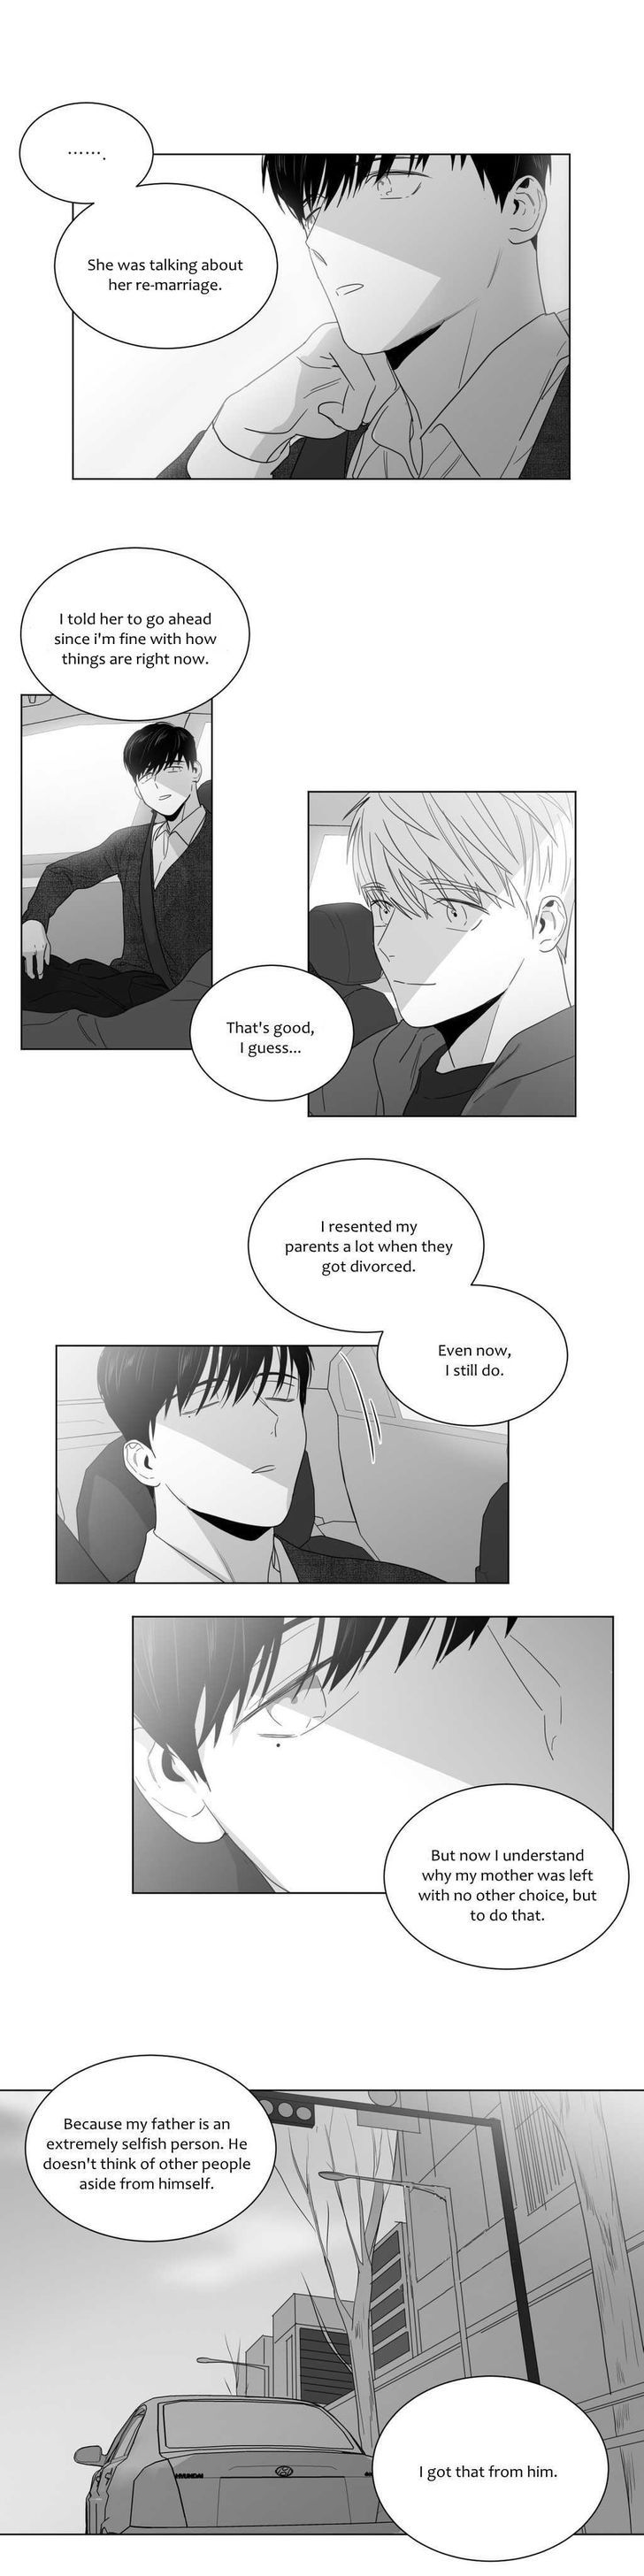 Lover Boy (Lezhin) Chapter 017 page 12